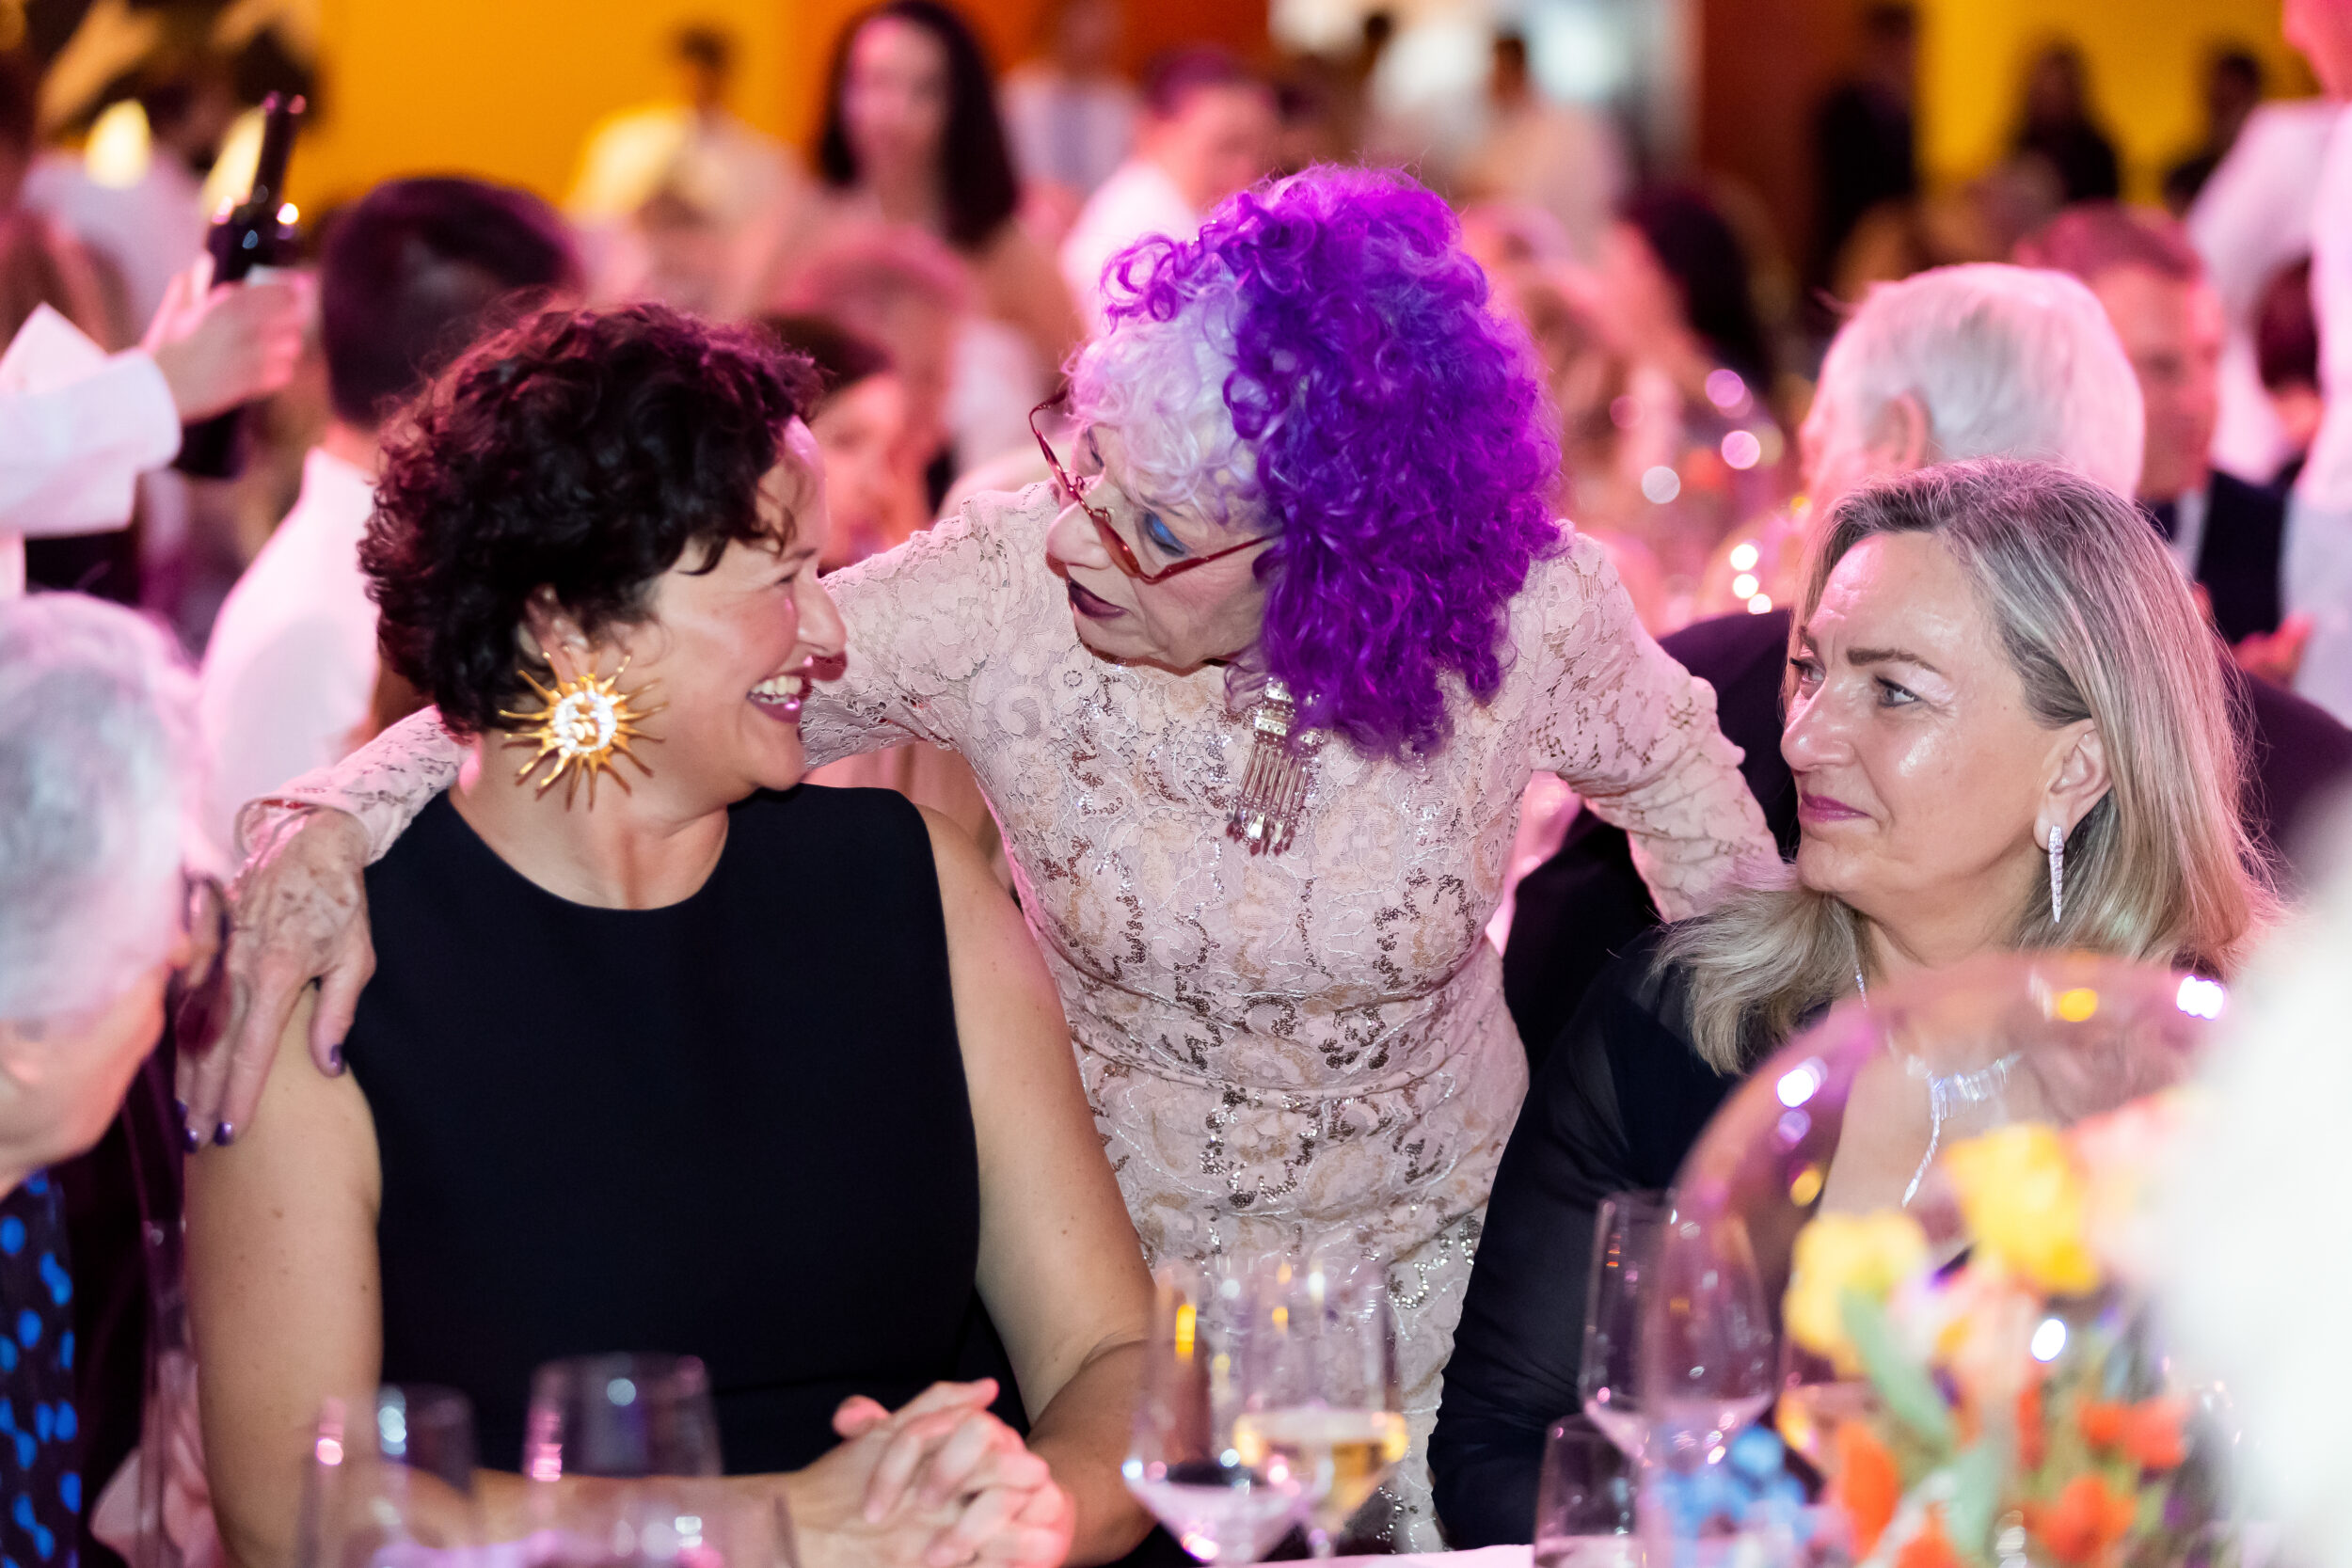 A light-skinned woman with purple hair leans down to chat with two light-skinned women seated at a black-tie event.